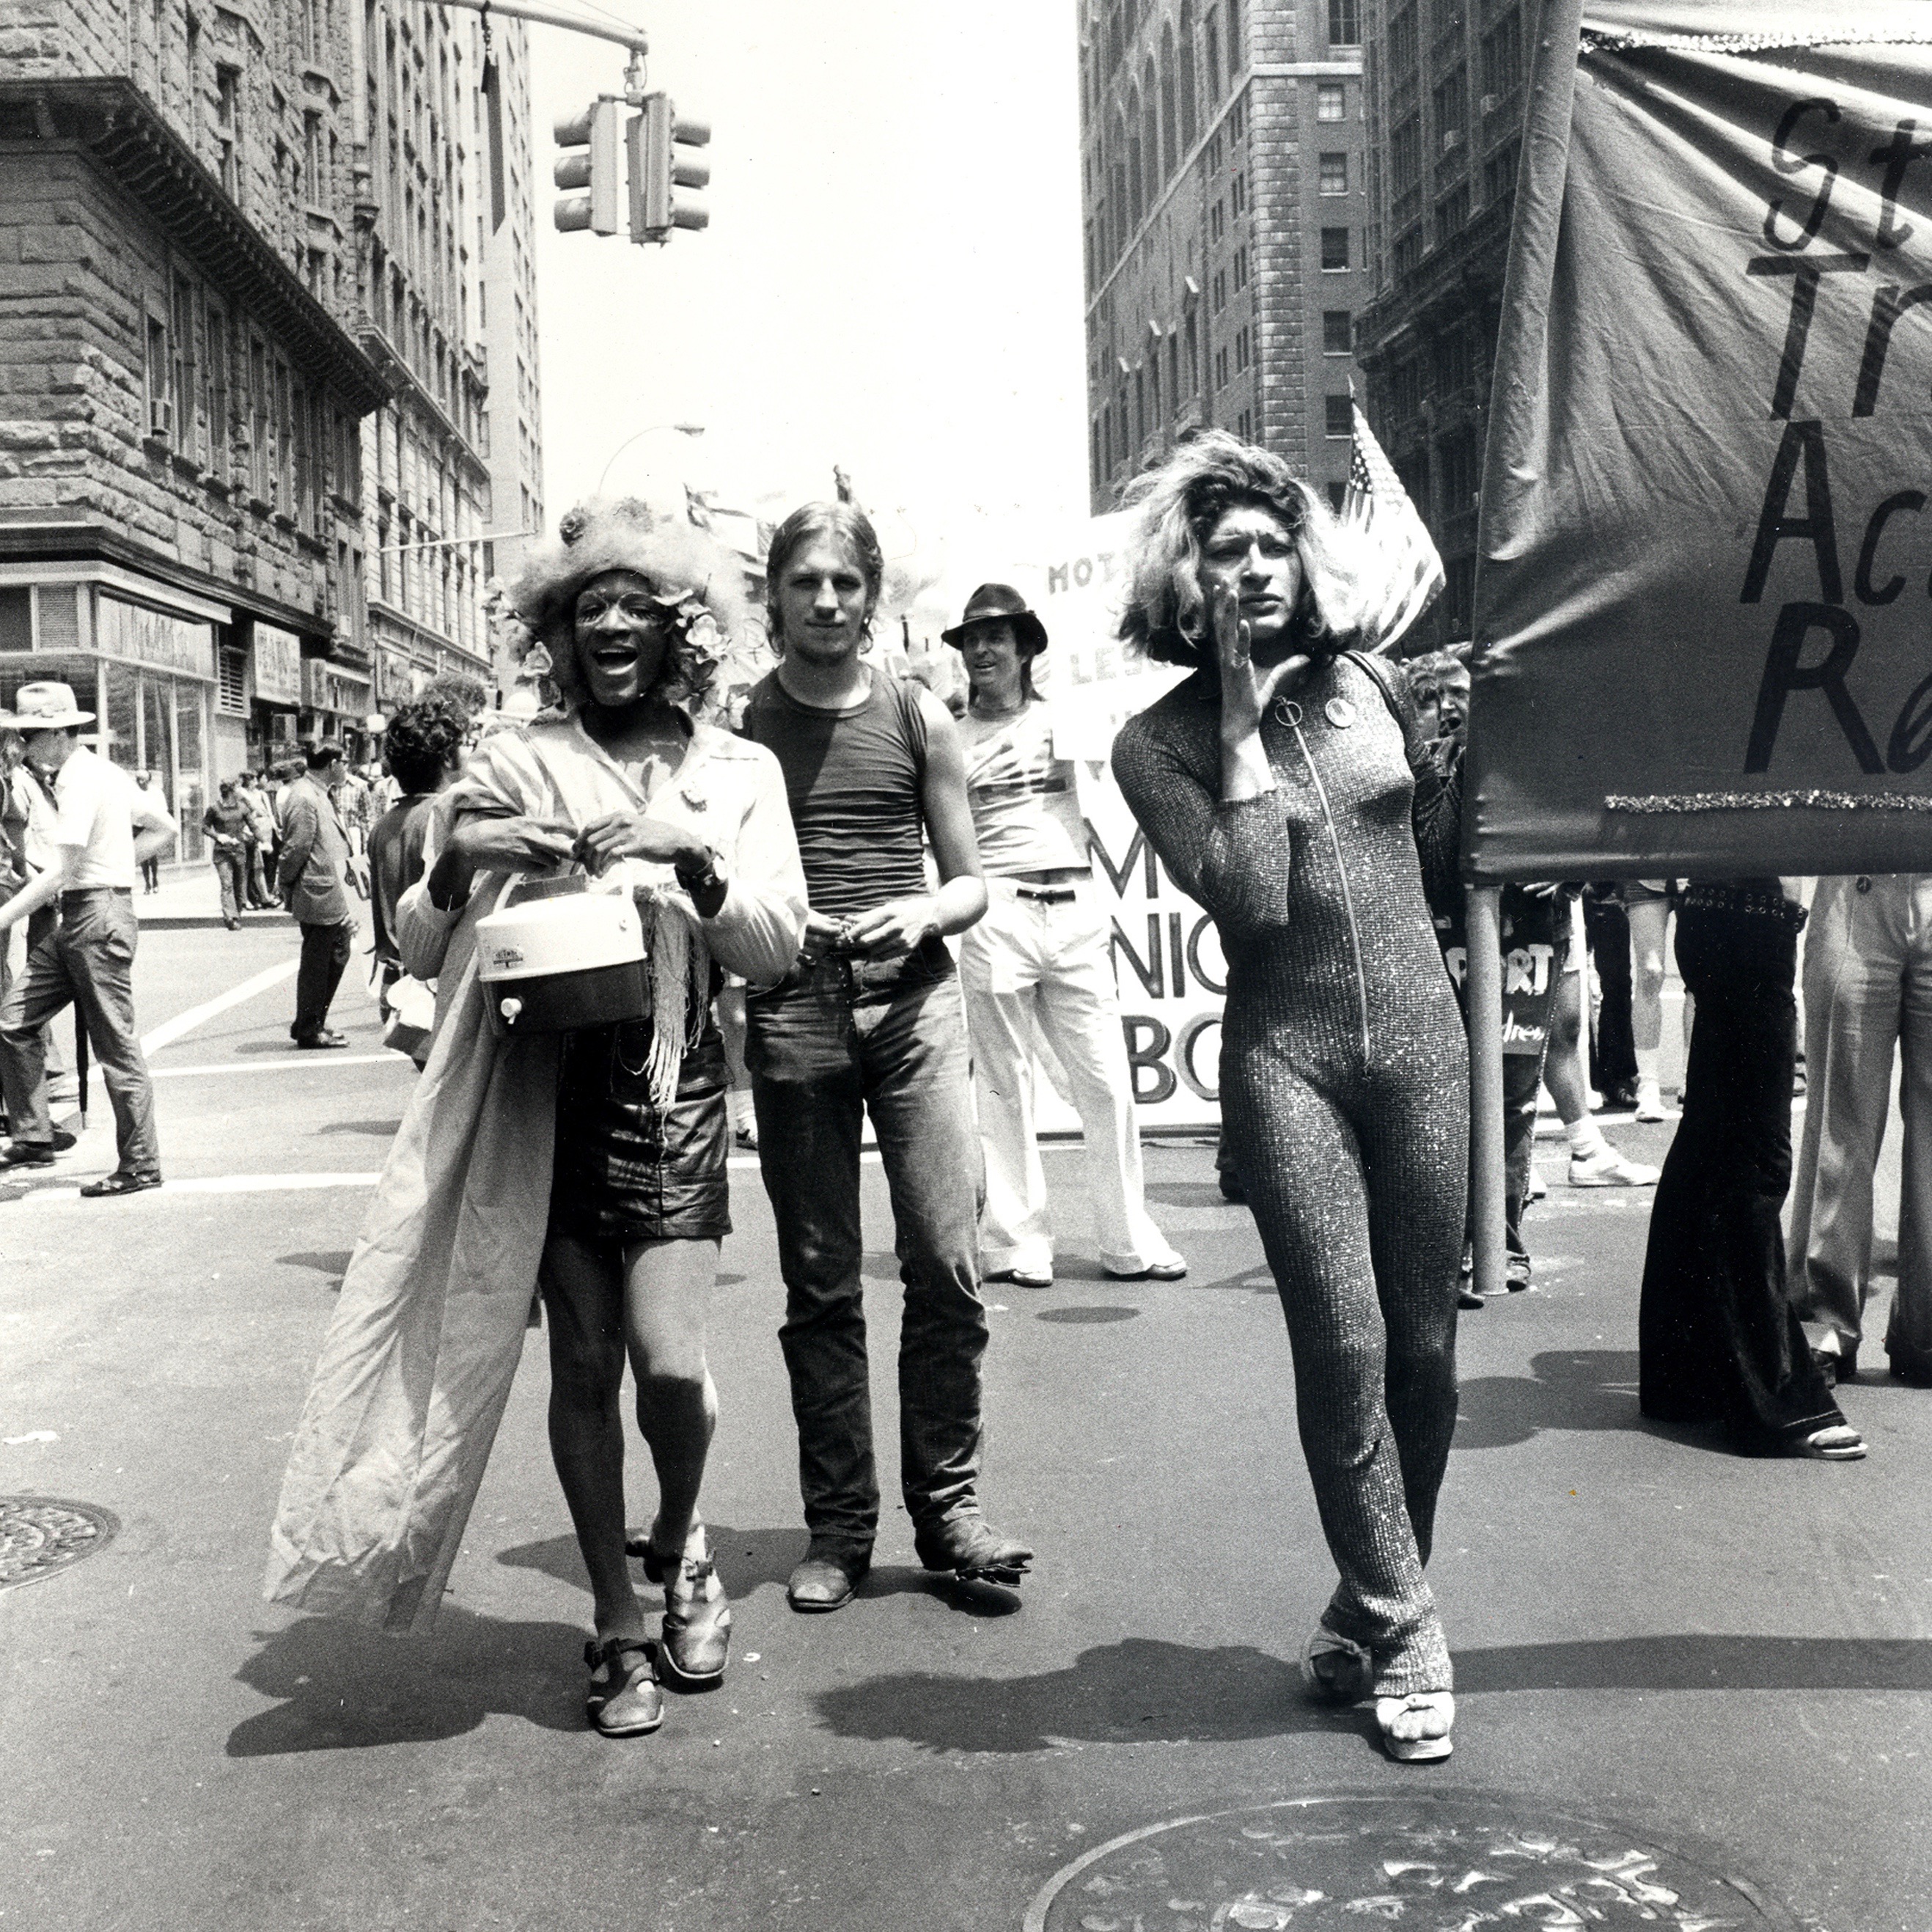 Marsha P. Johnson (left) and Sylvia Rivera (right), co-founders of the Street Transvestite Action Revolutionaries (STAR) at the Christopher Street Liberation Day Gay Pride Parade, New York City, June 24, 1973. Credit: Leonard Fink, courtesy LGBT Community Center National History Archive.